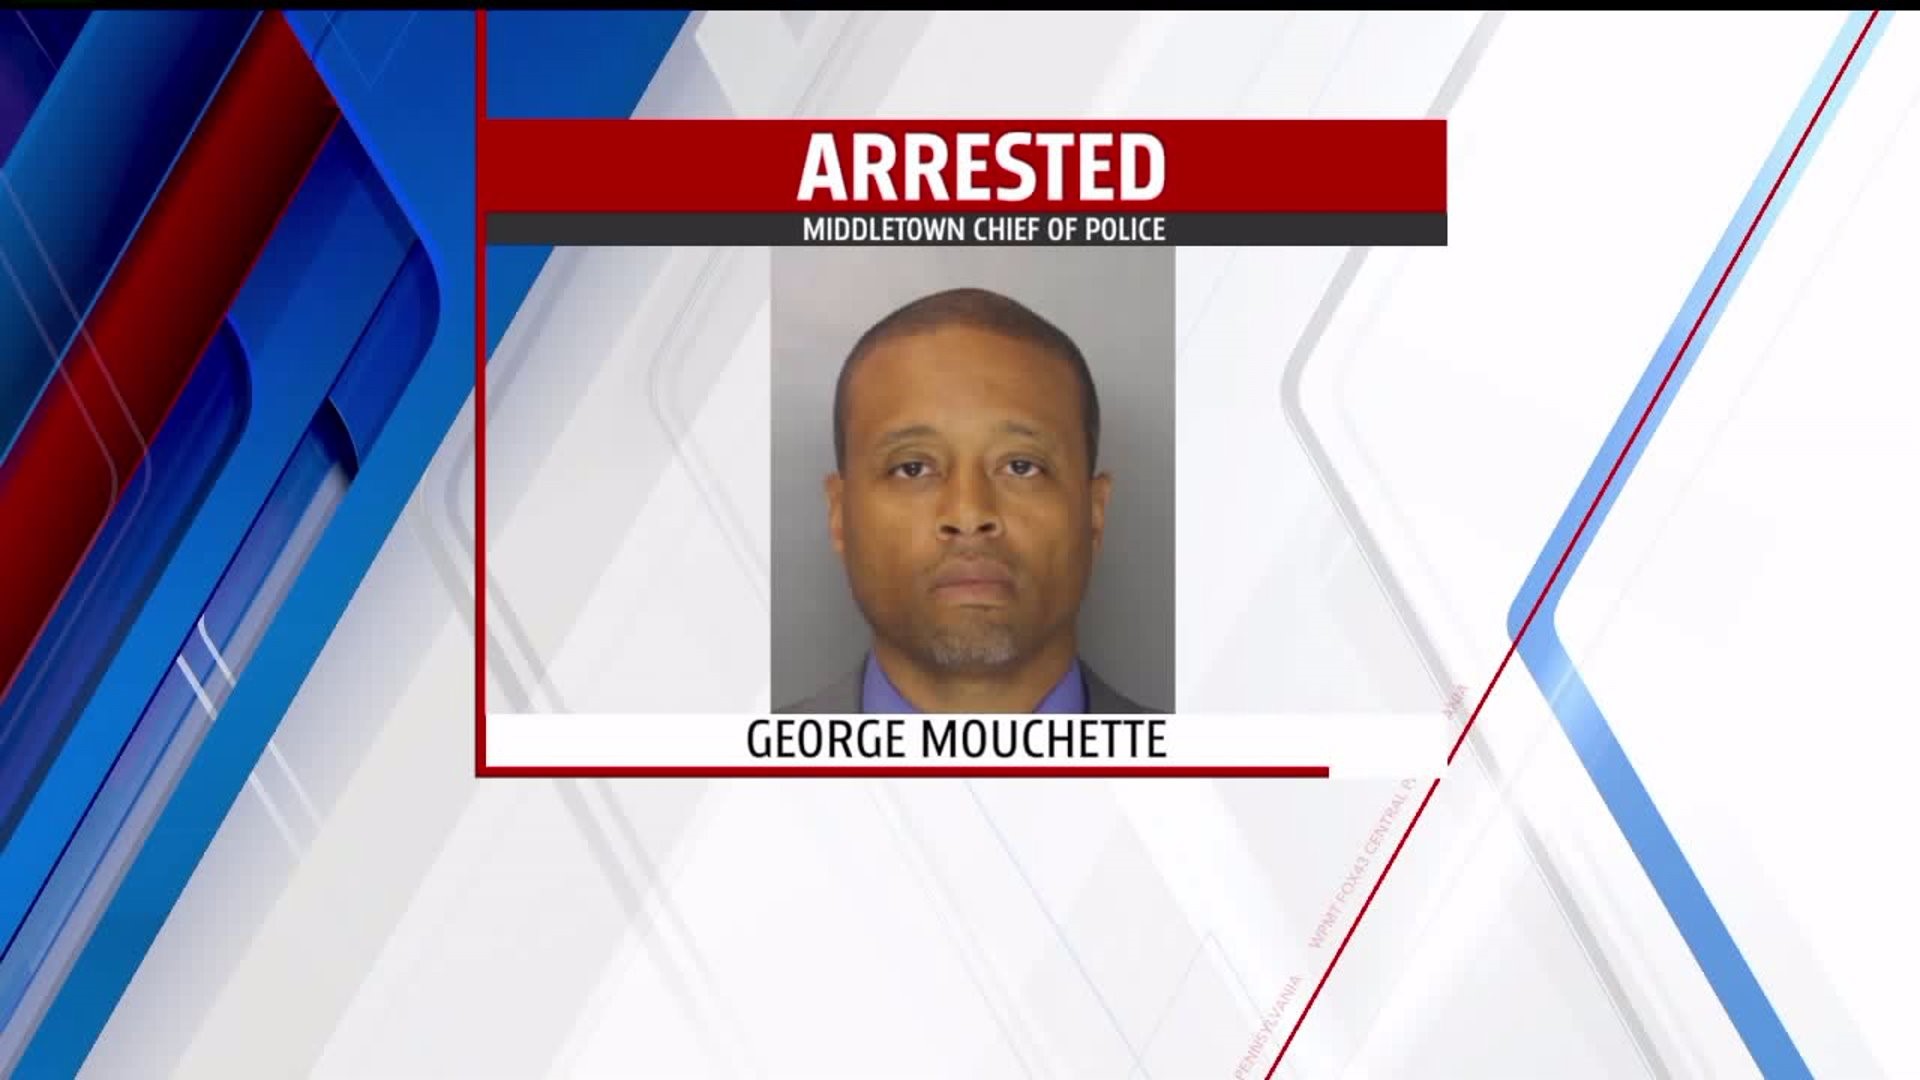 Middletown police chief charged with attempted rape